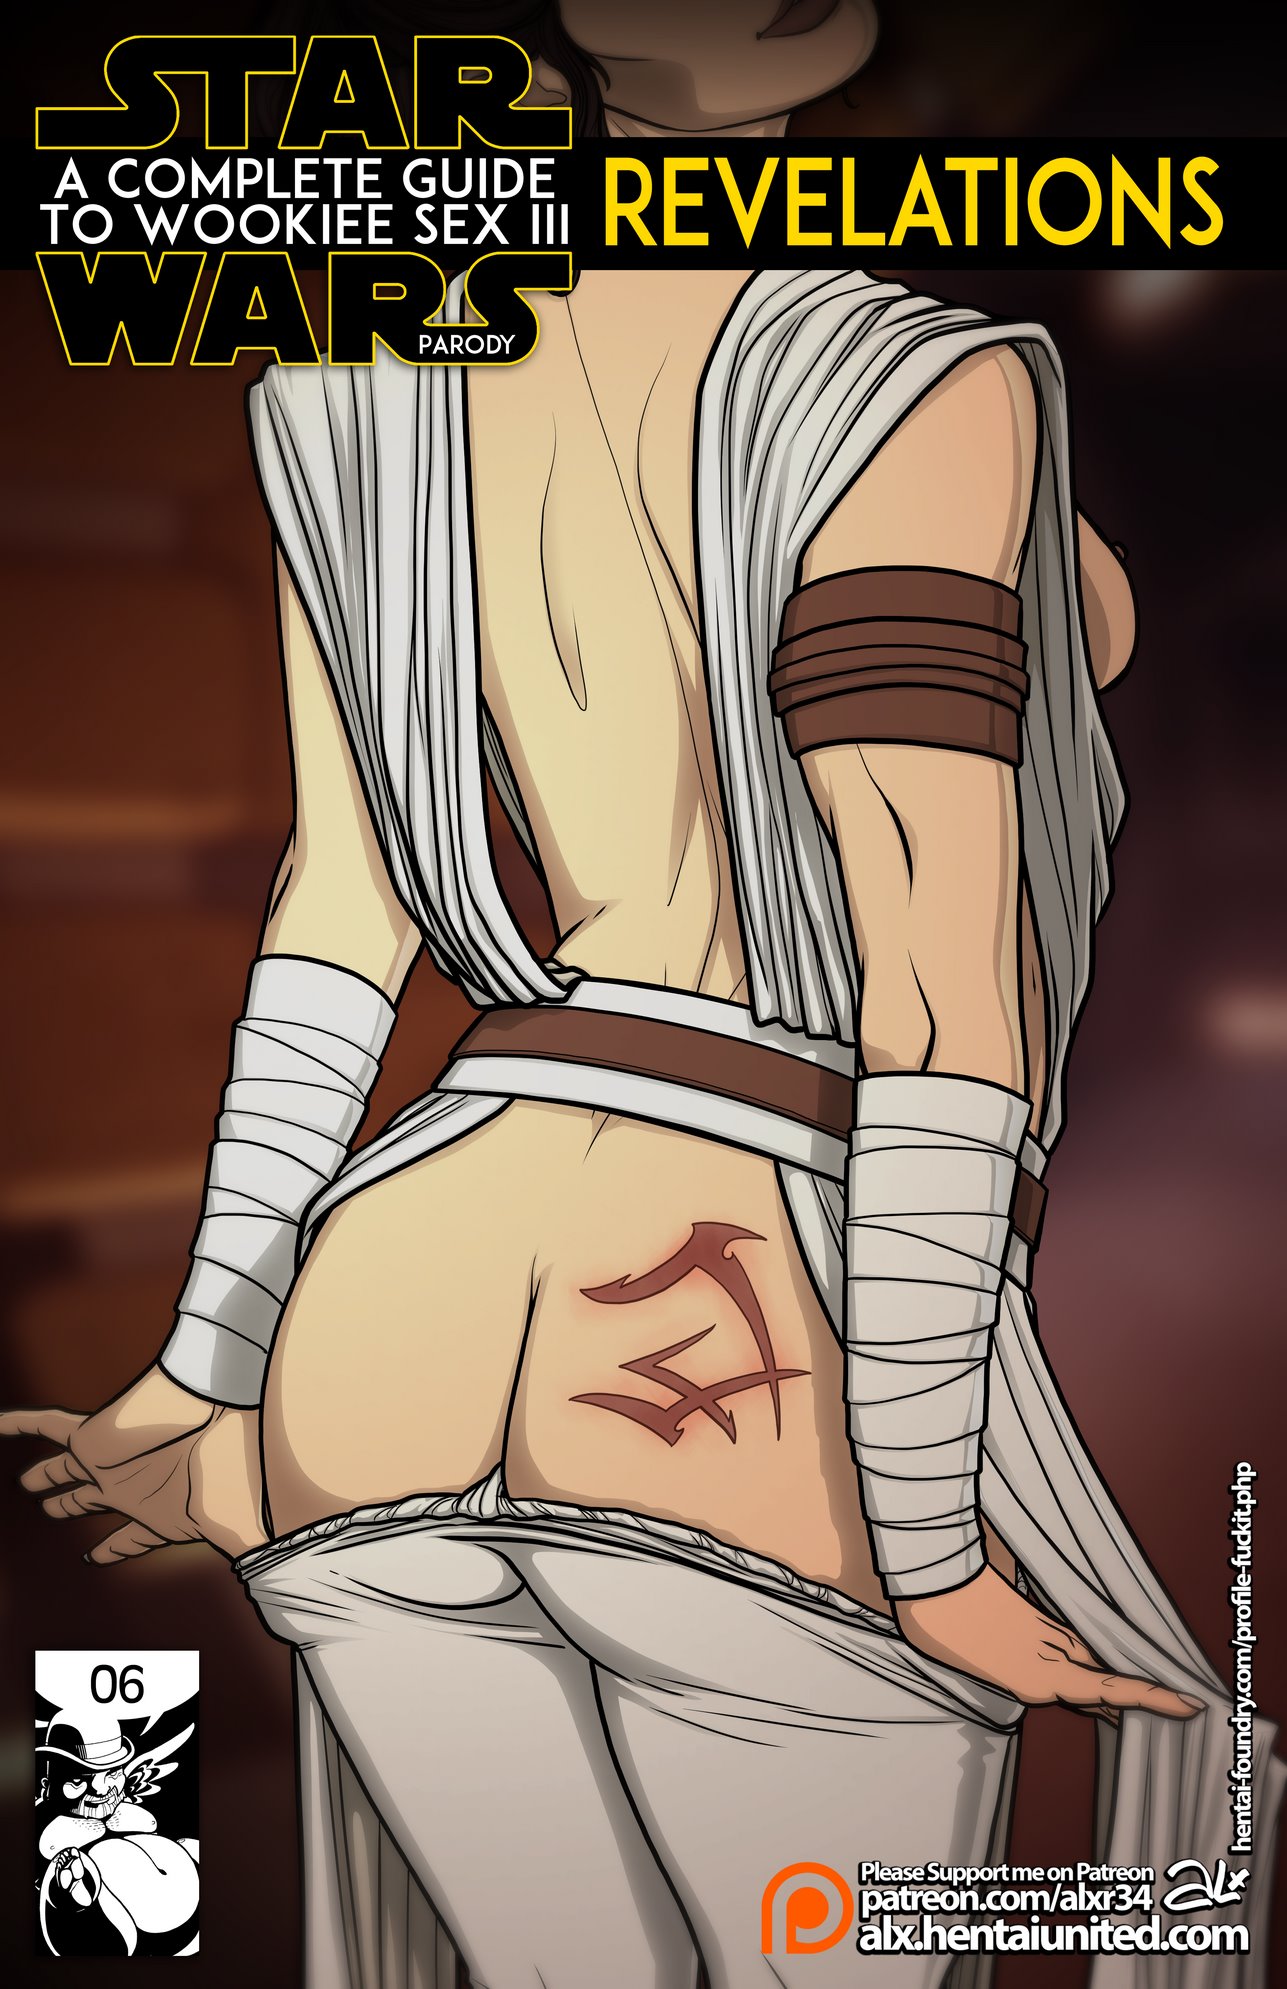 Star Wars Sex - Alx) Star Wars: A Complete Guide to Wookie Sex III porn comic